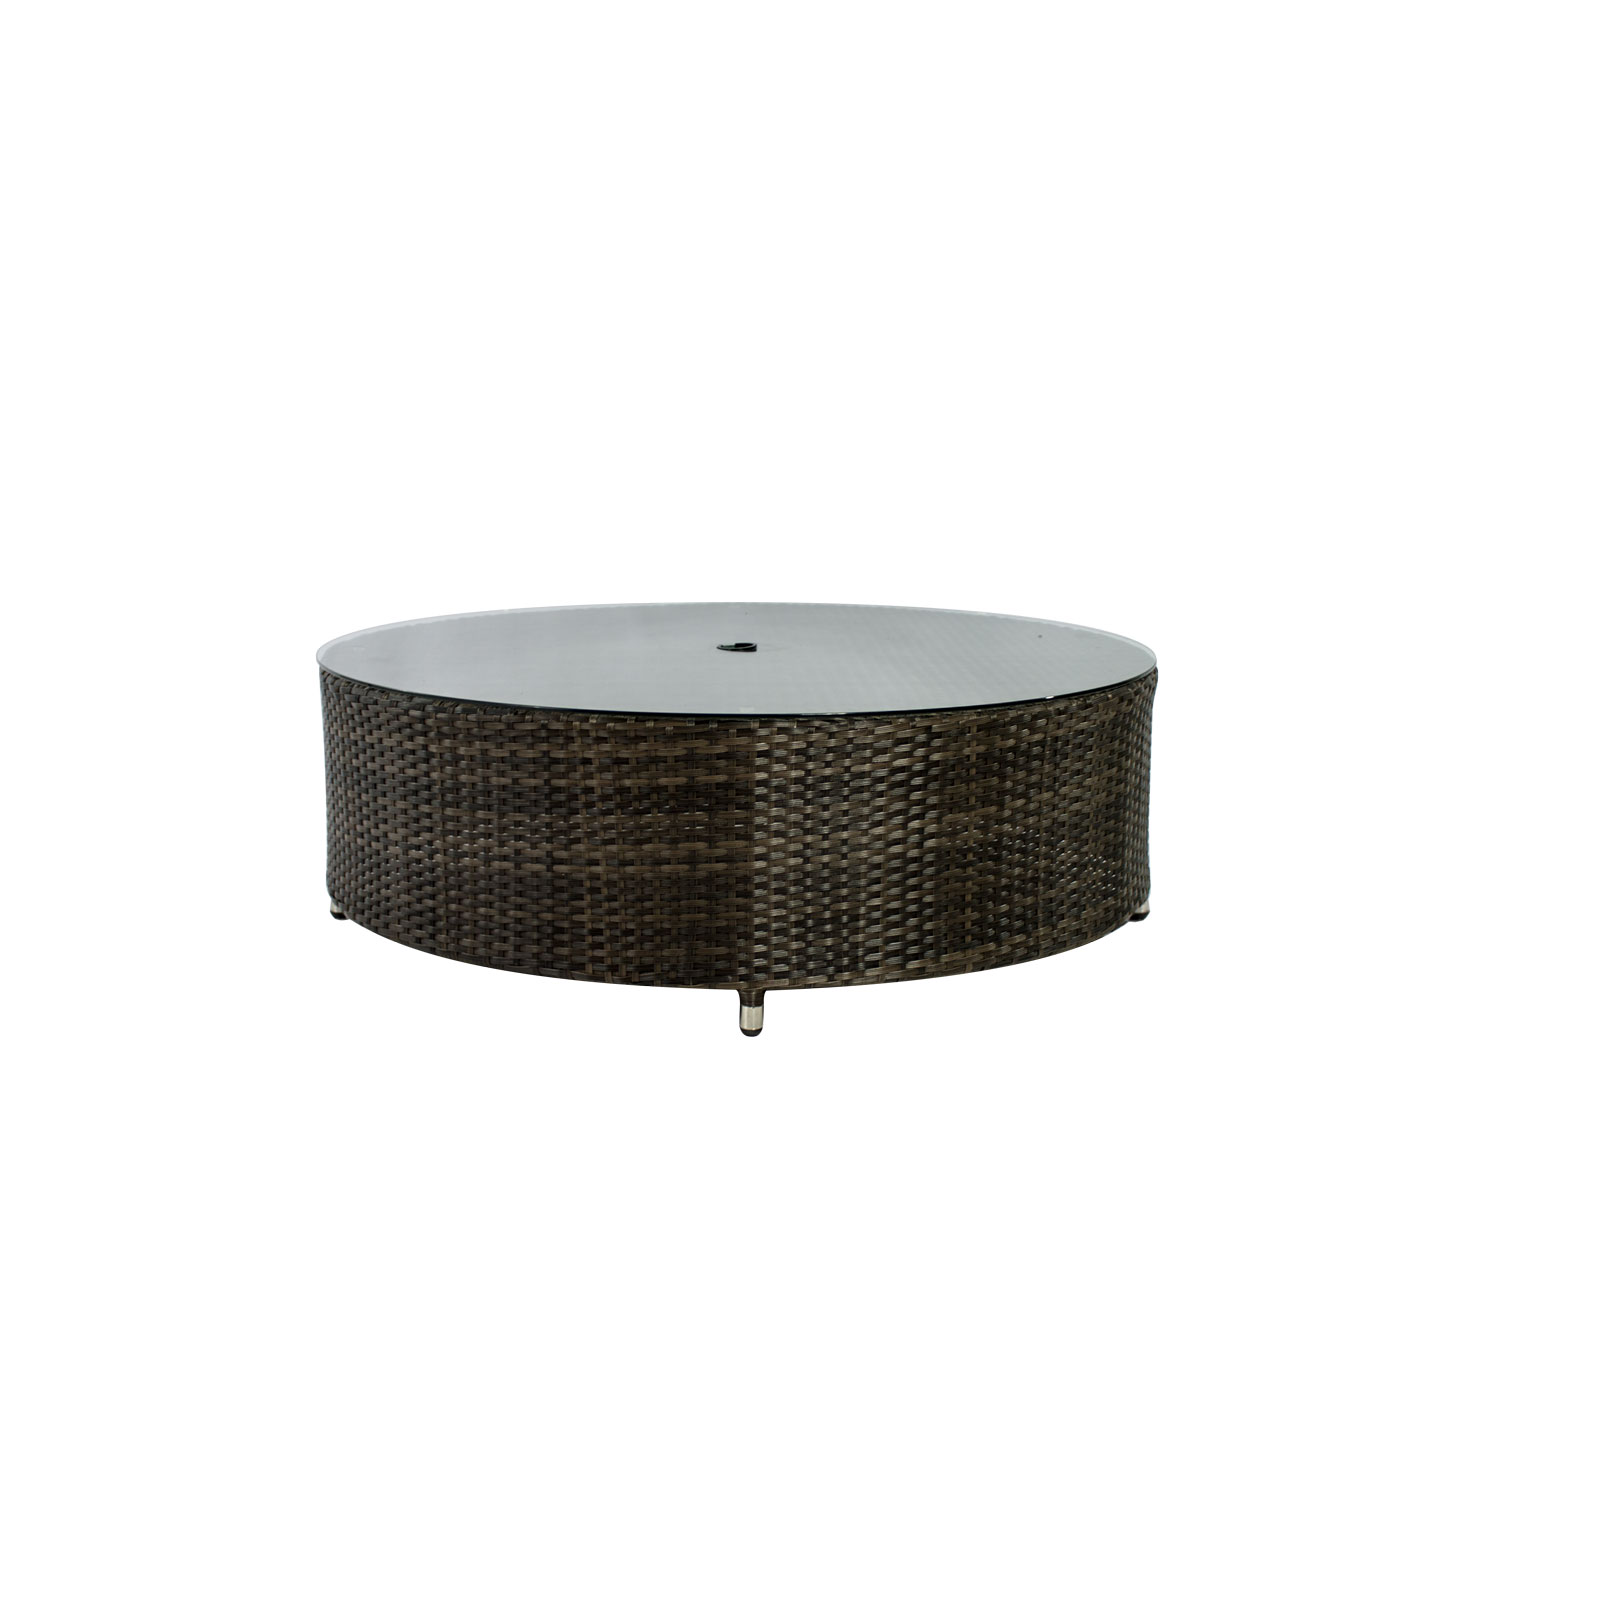 circa coffee table round with umbrella hole source furniture outdoor side storage hampton black wood tennis robot foremost accent target dining room pottery barn mirrored cube